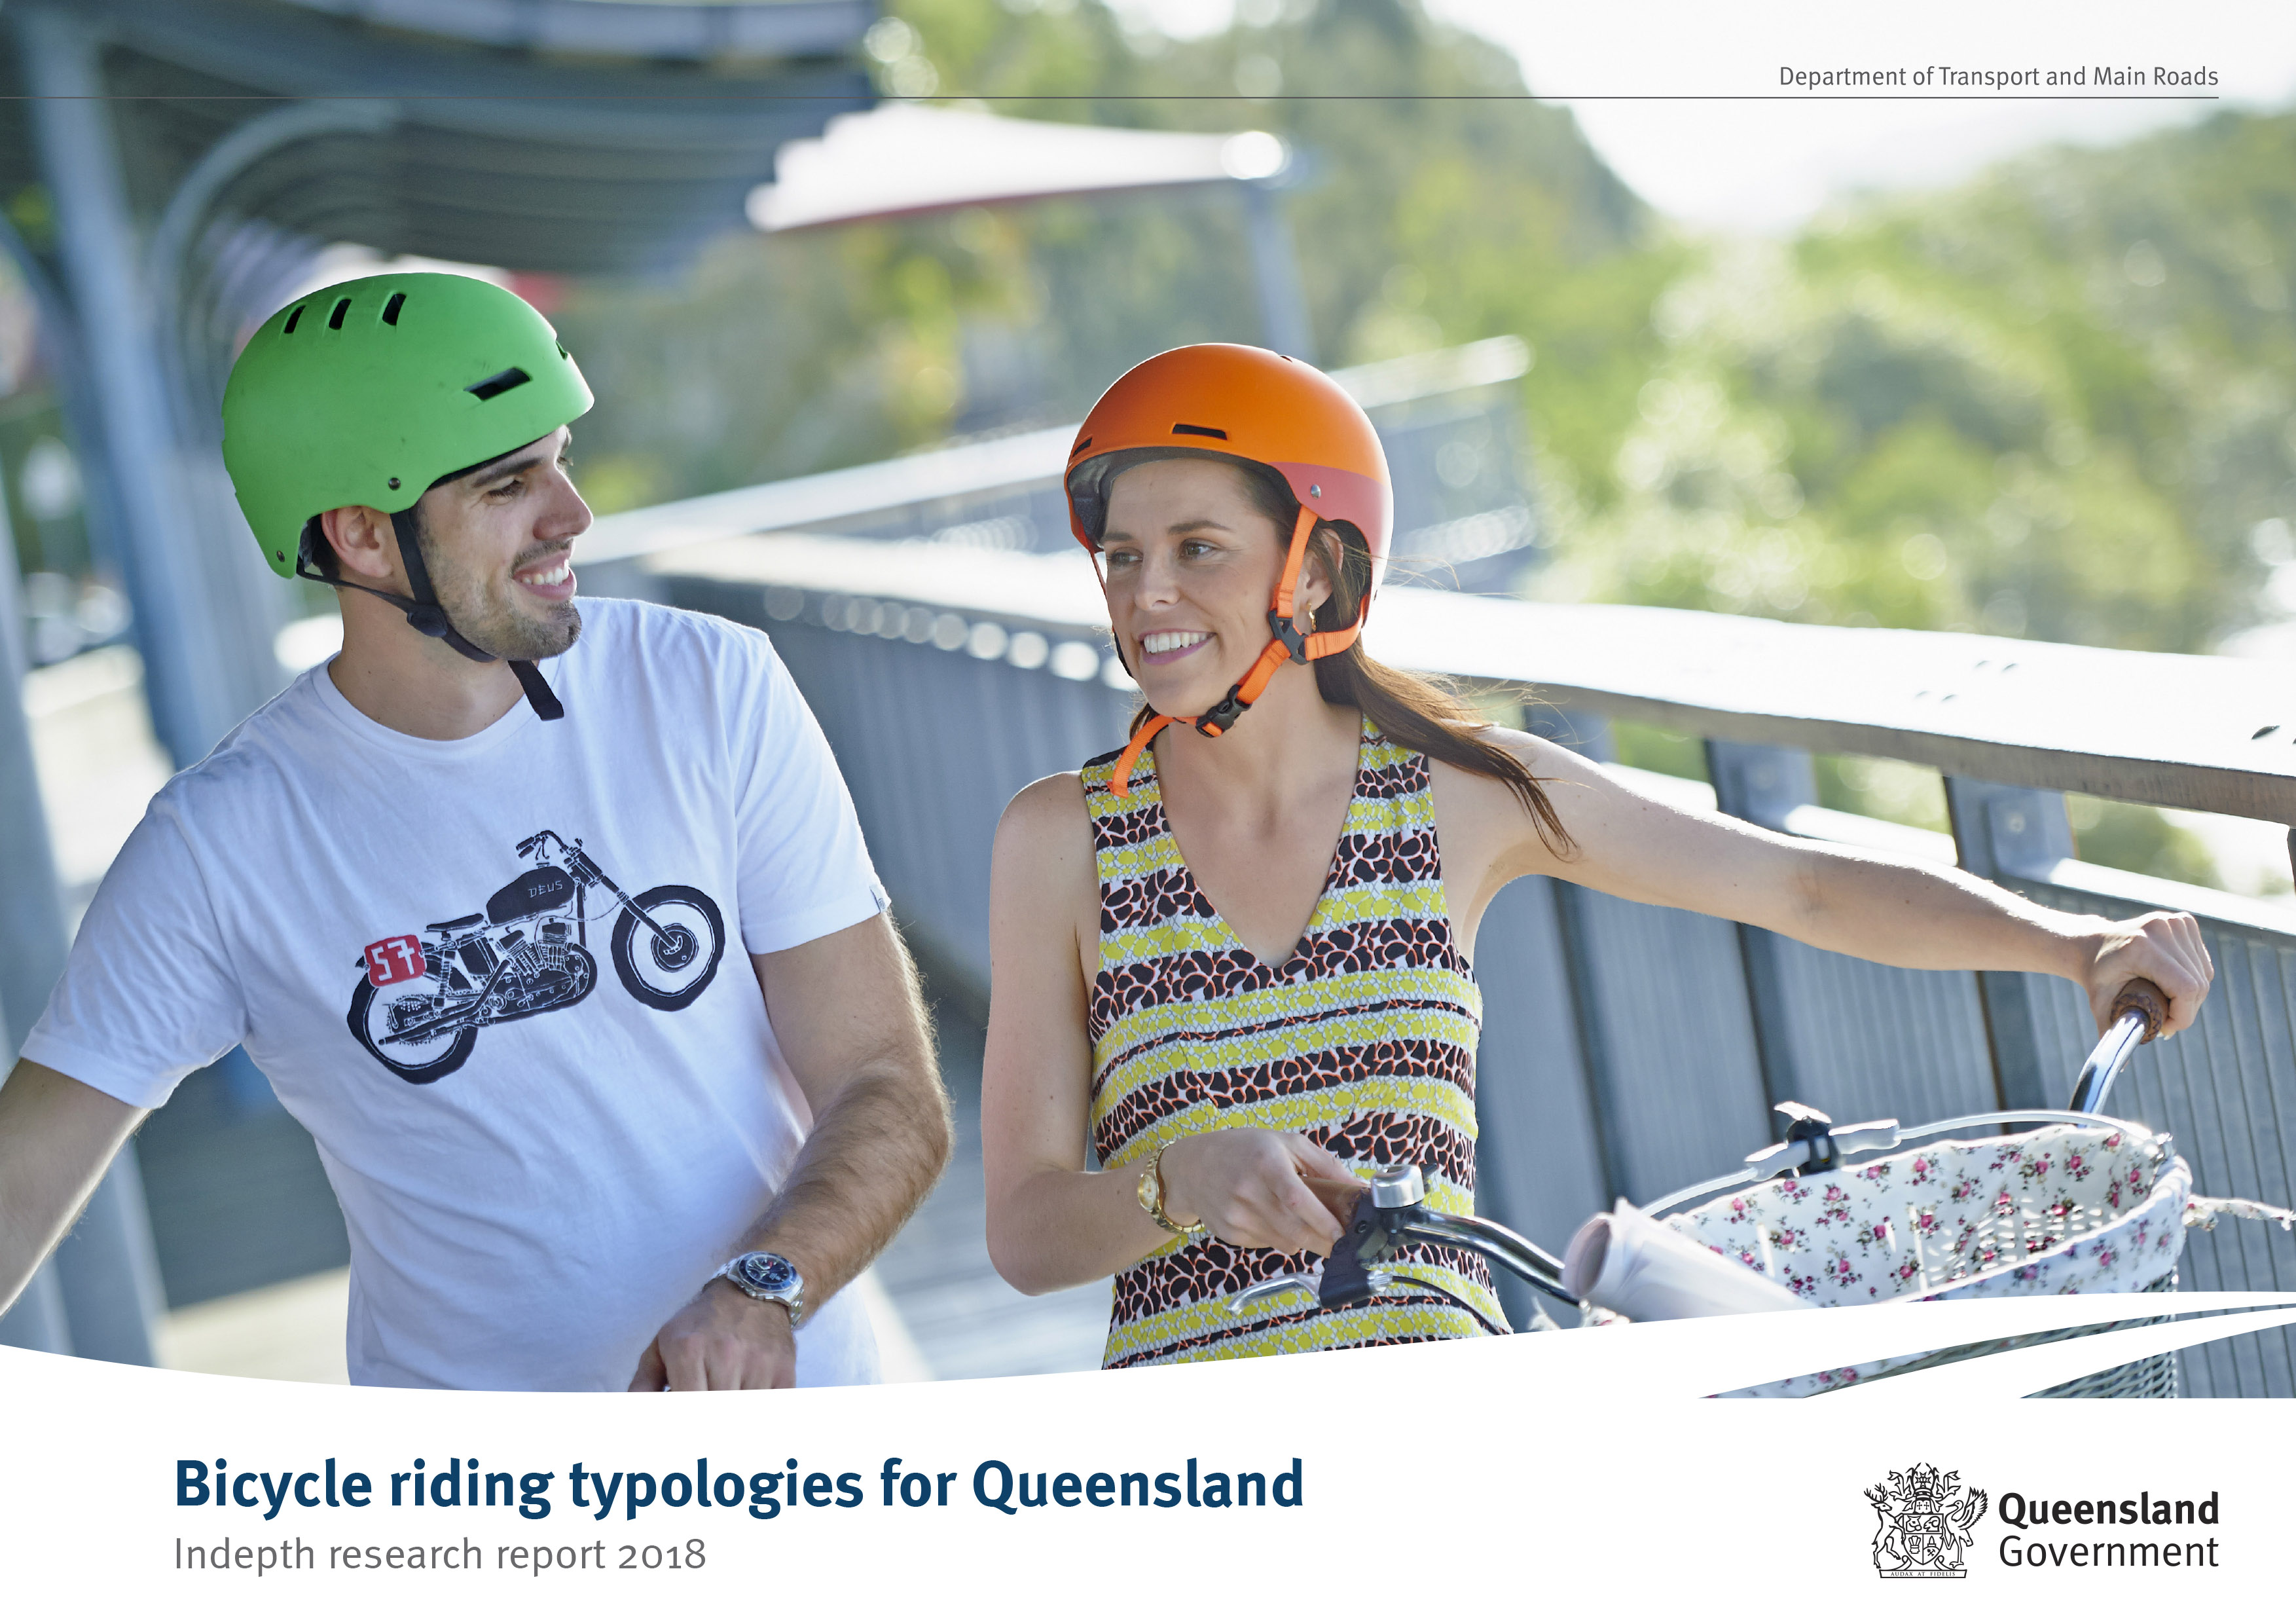 Bicycle riding typologies for
Queensland: Indepth research report 2018